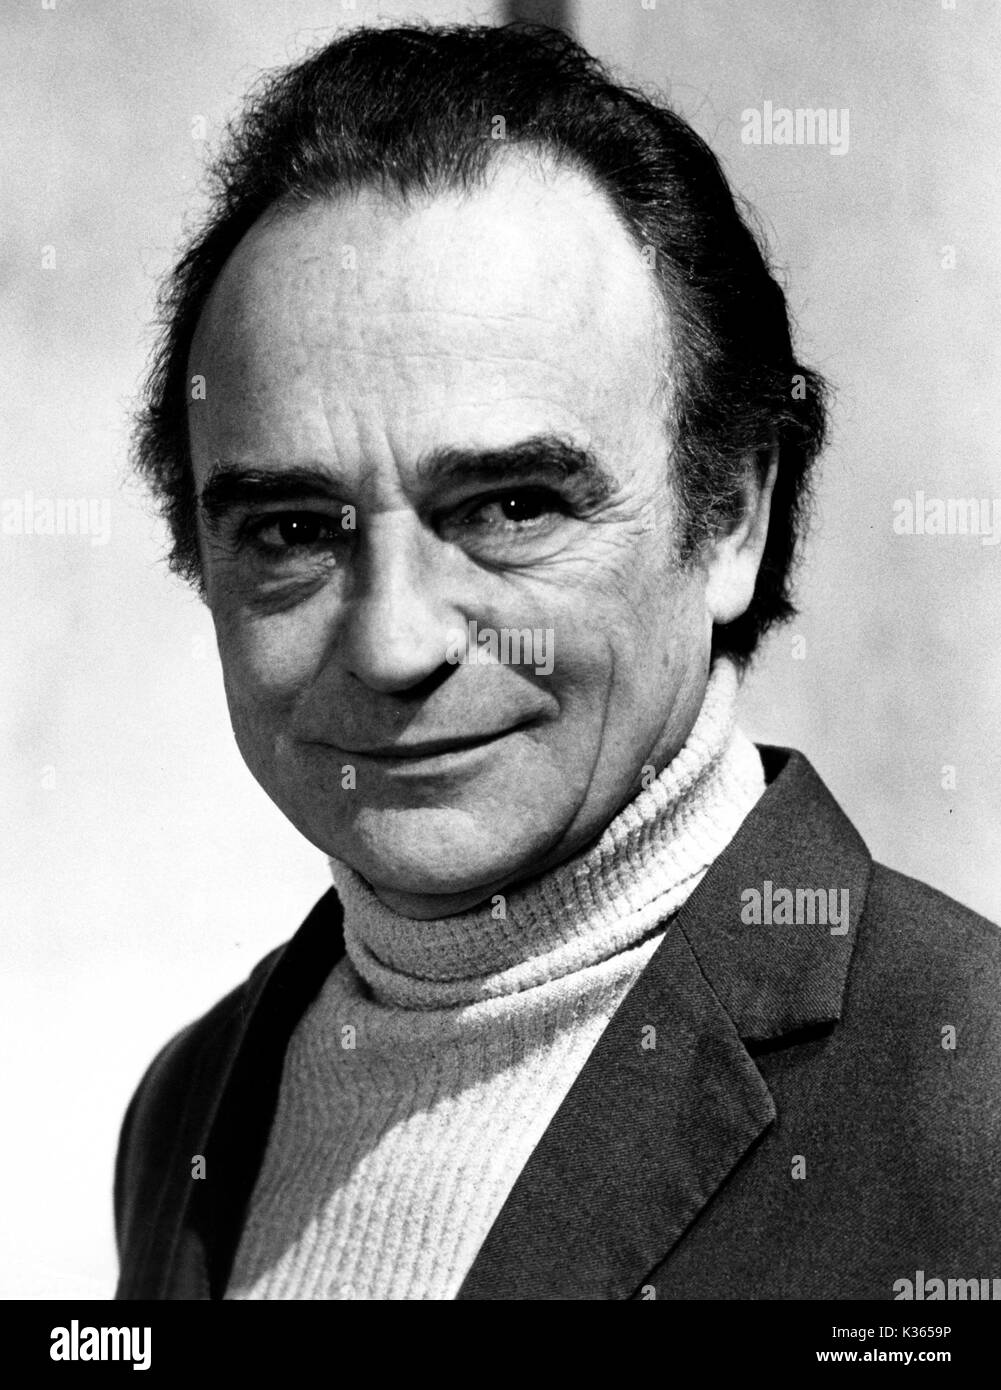 KENNETH CONNOR Stock Photo: 156873186 - Alamy